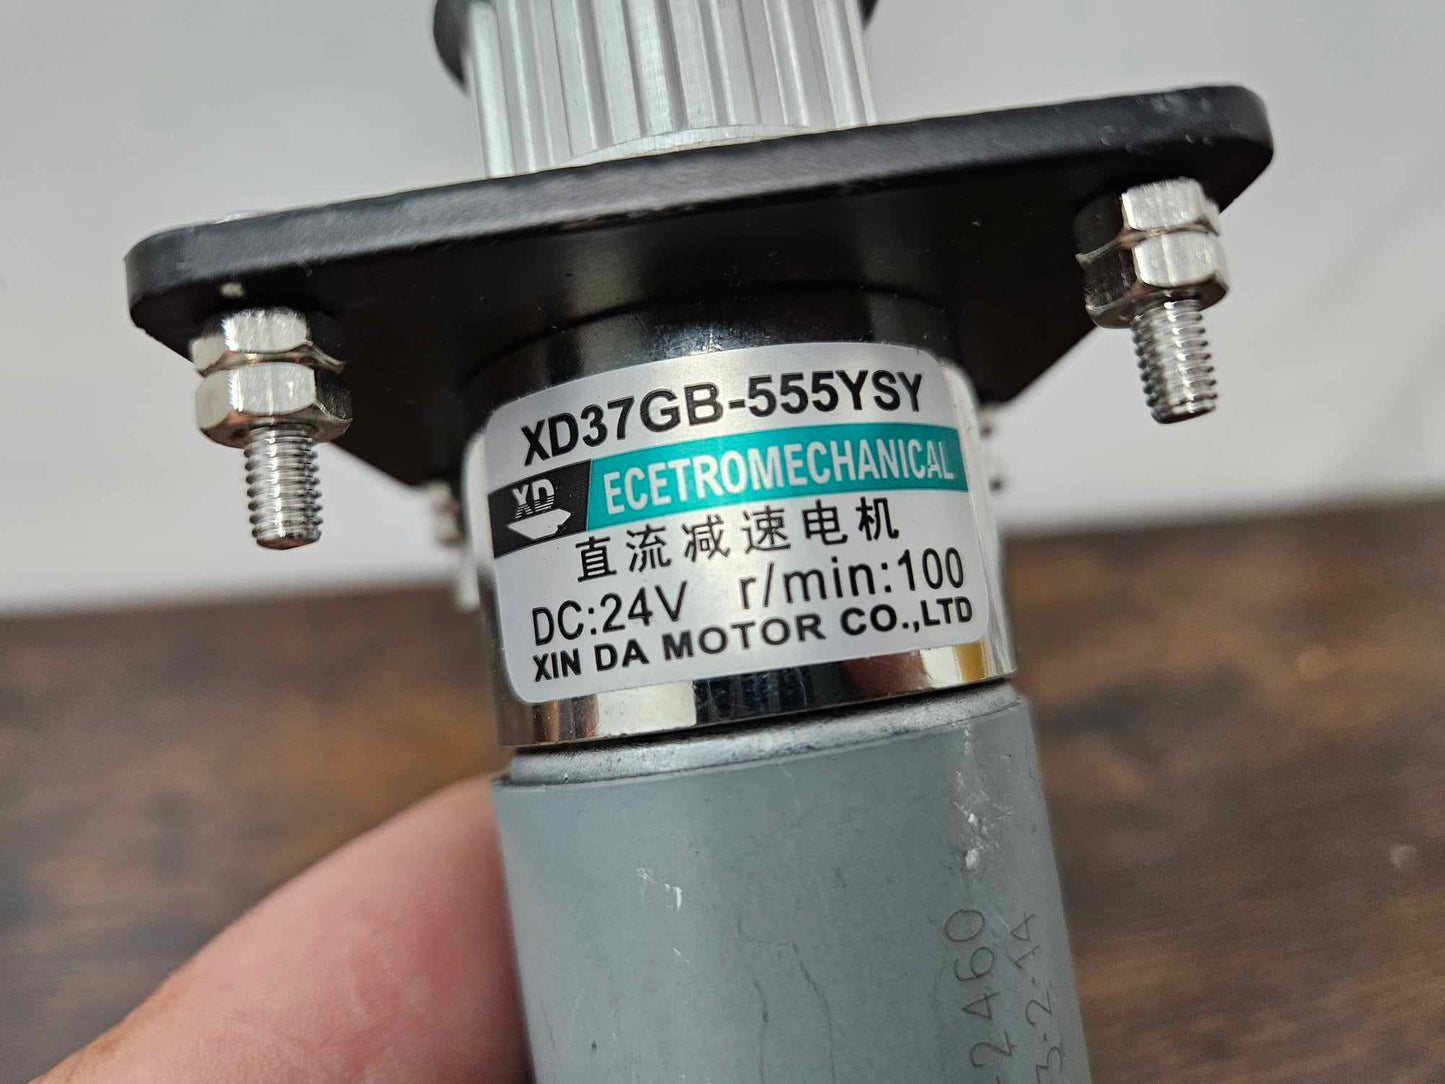 Replacement motor for up and down z axis for most Chinese printers xd37gb-555ysy